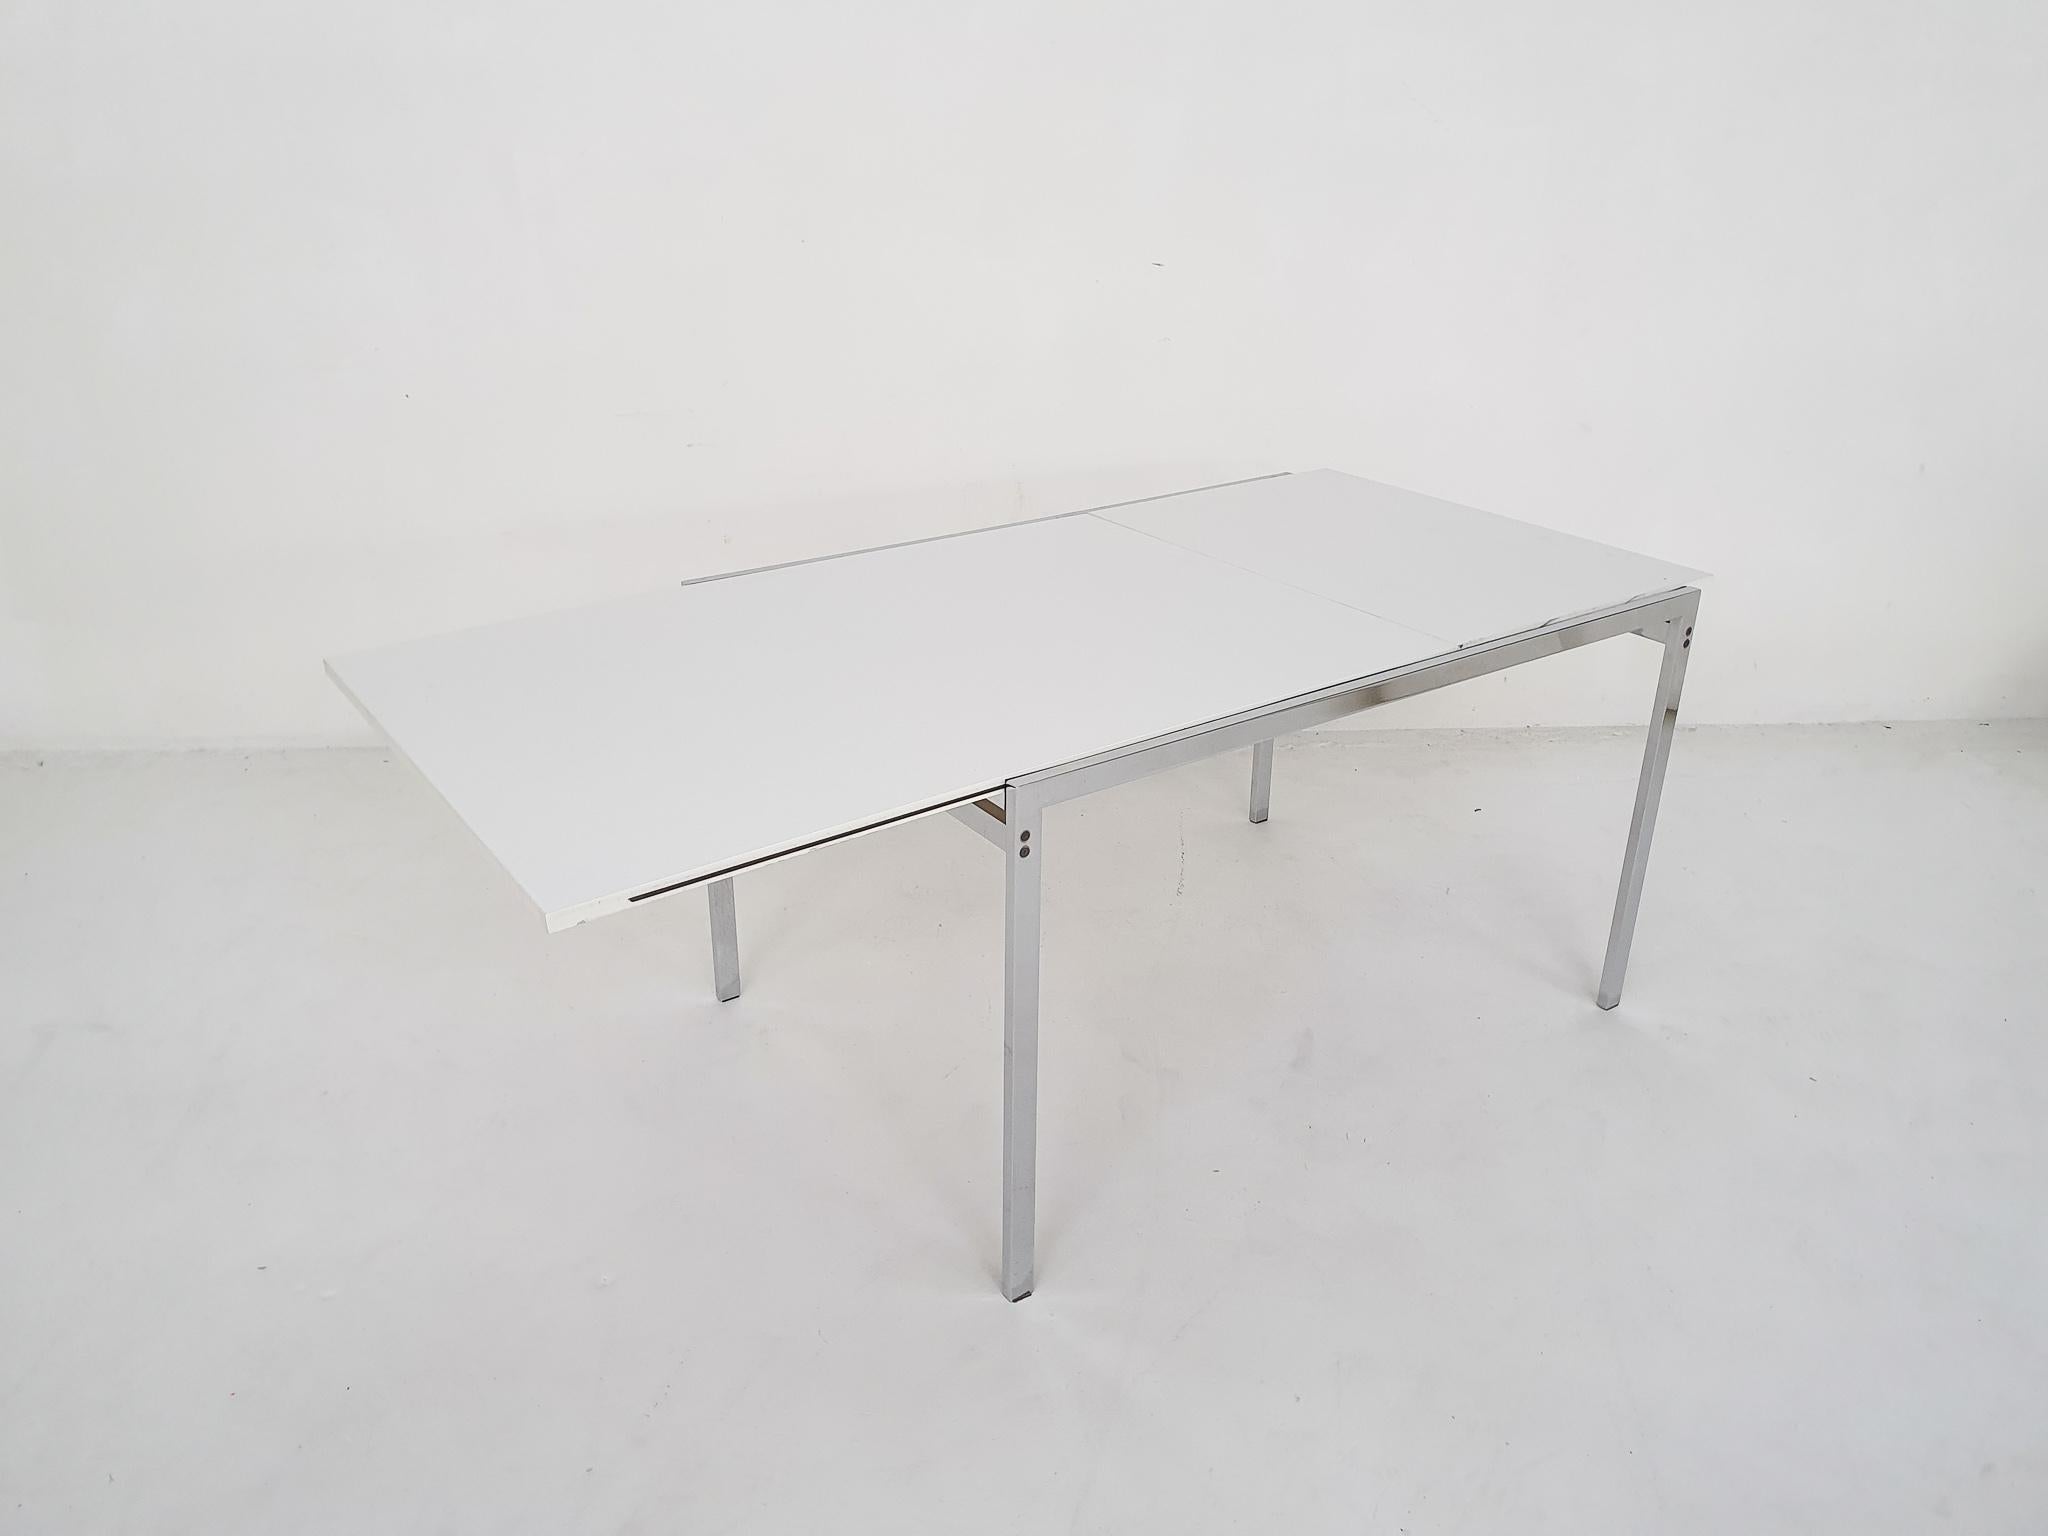 Silver metal frame and white formica top. Table can be extended from 120 to 170cm
